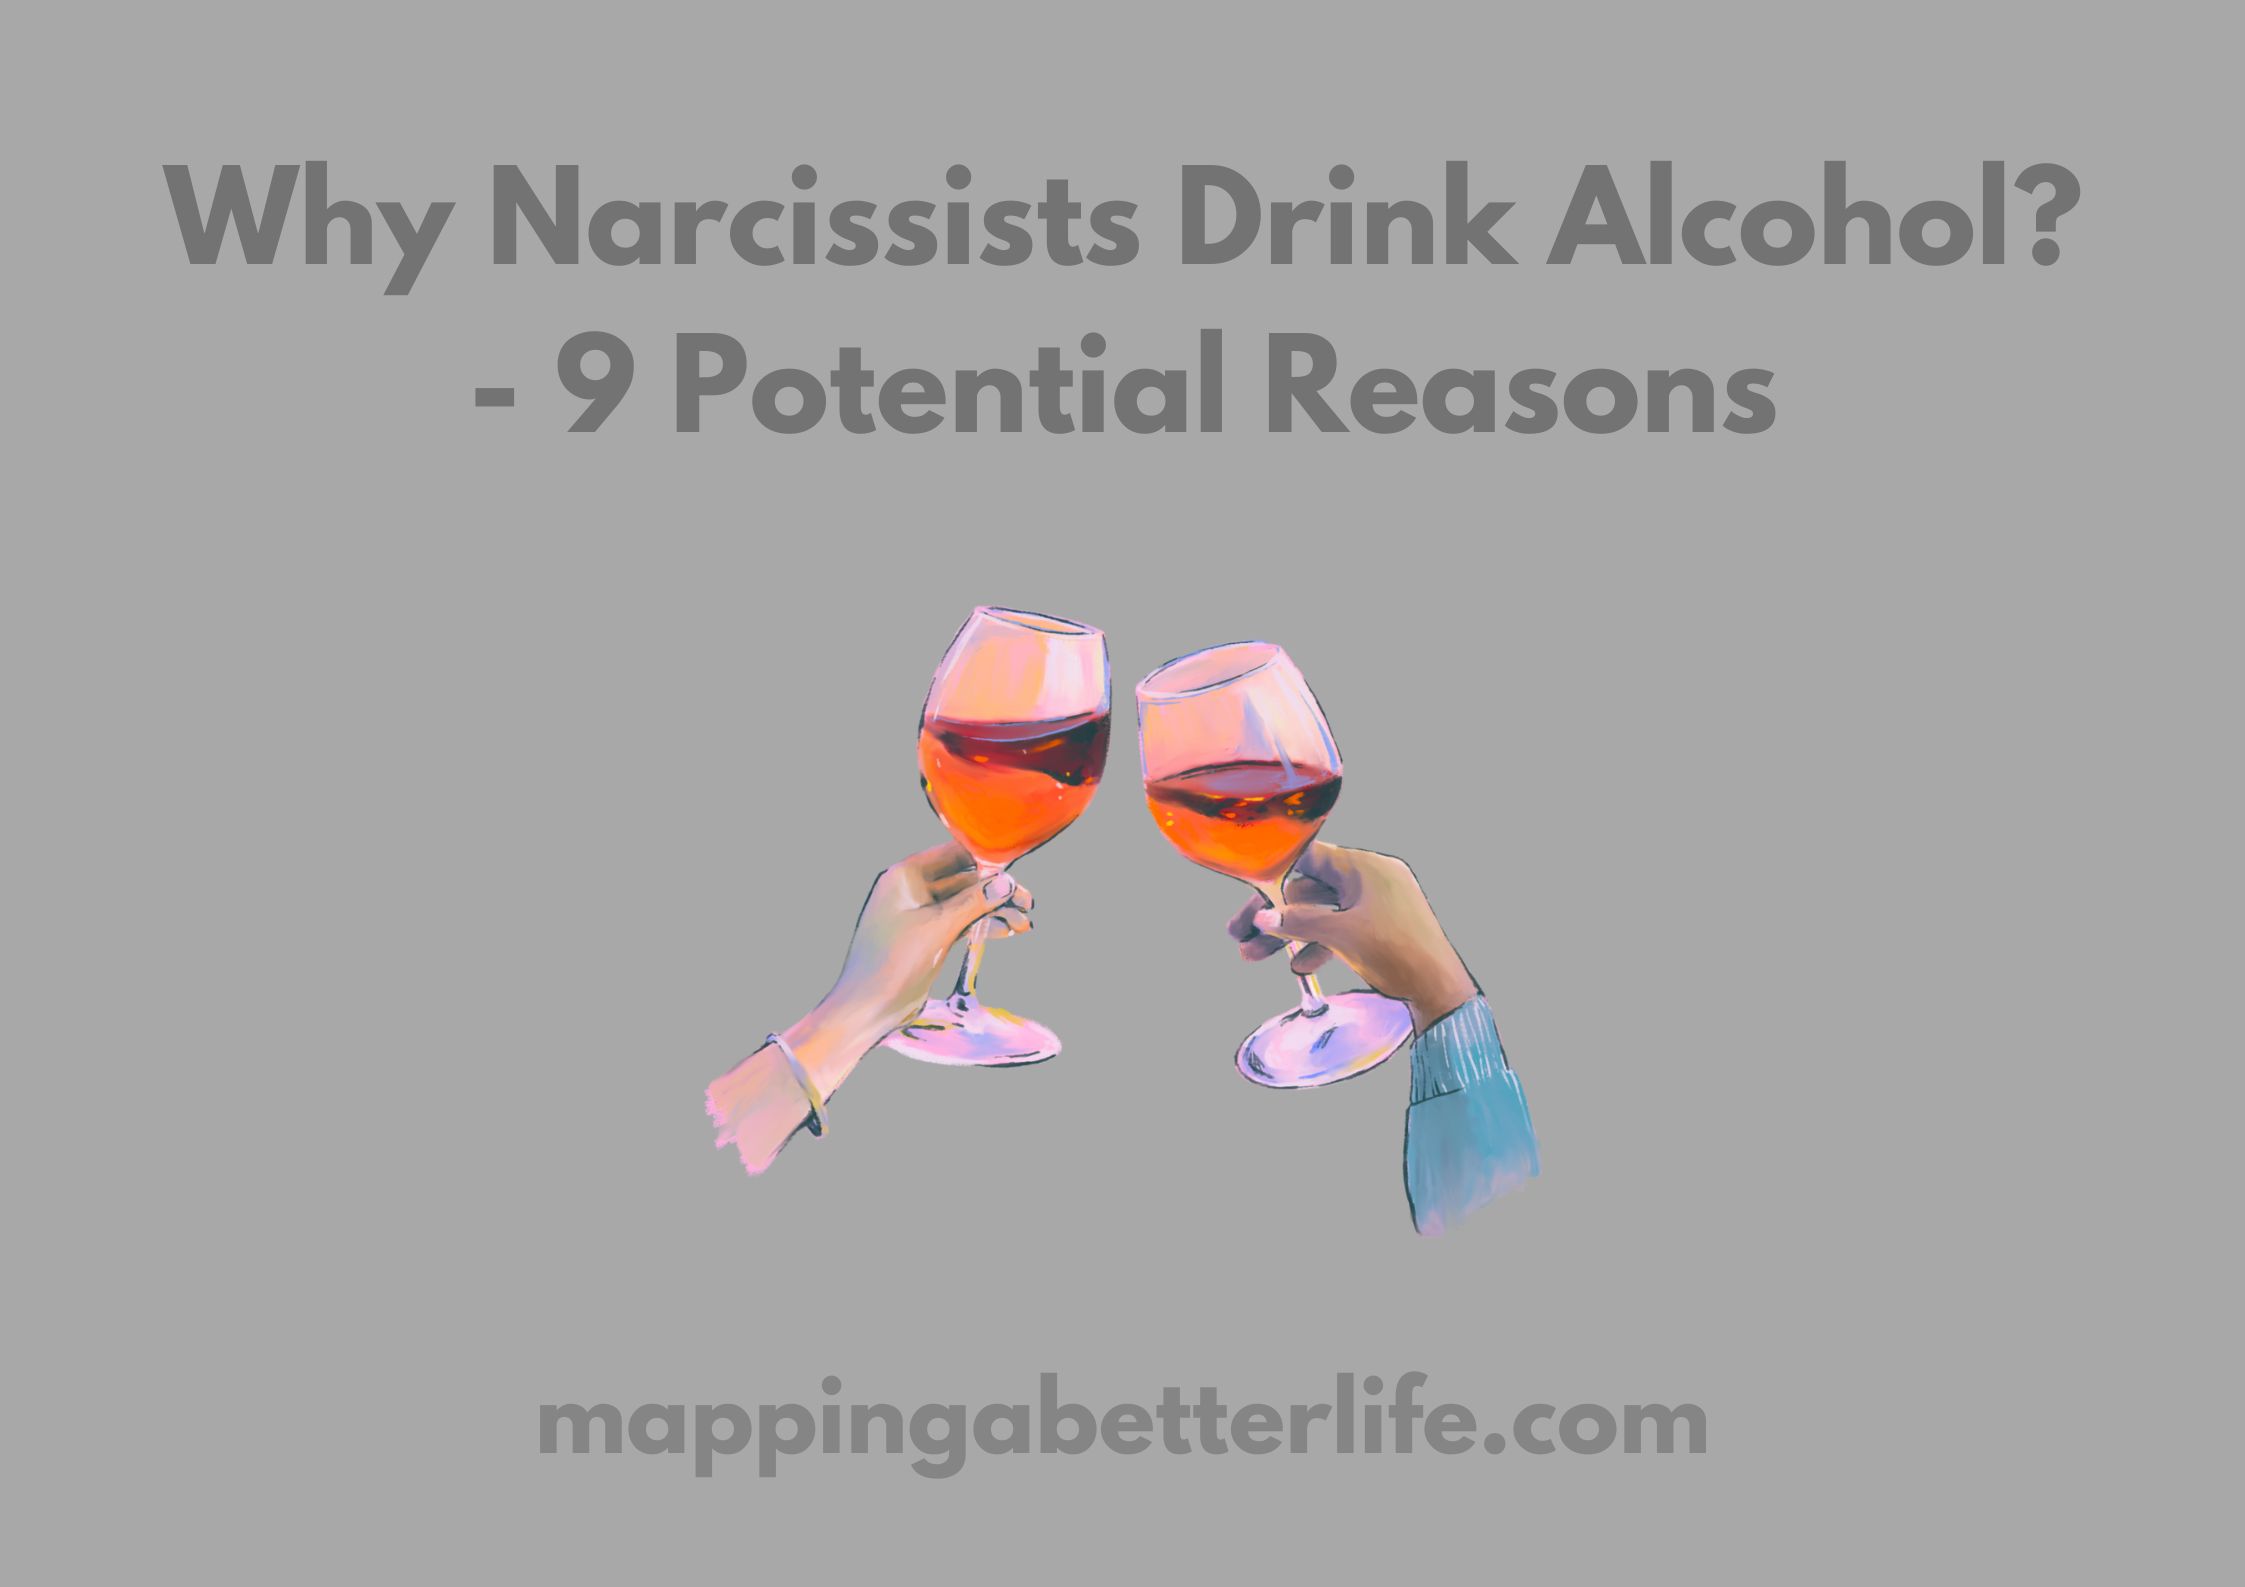 Why Narcissists Drink Alcohol? - 9 Potential Reasons